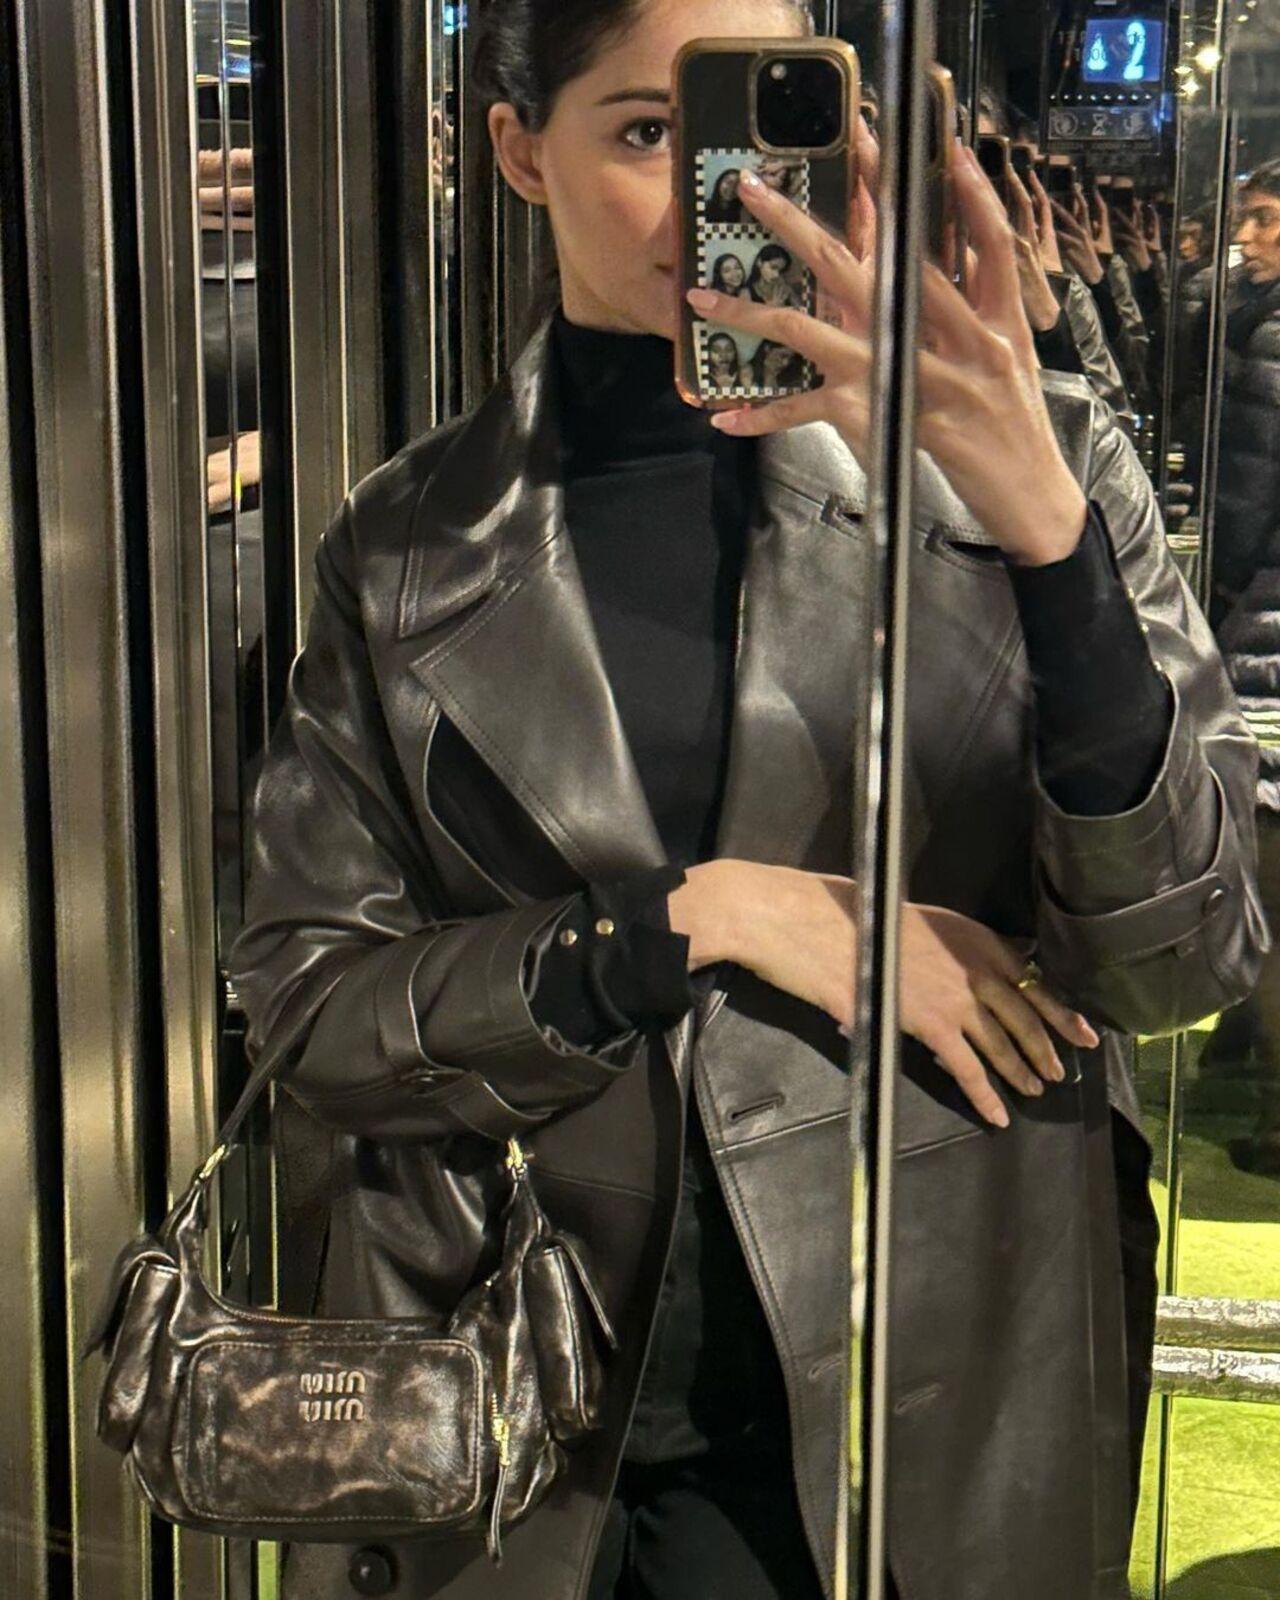 The 'Pati Patni Aur Woh' actress gets a quick lift selfie dressed in all black outfit perfect for the Paris weather